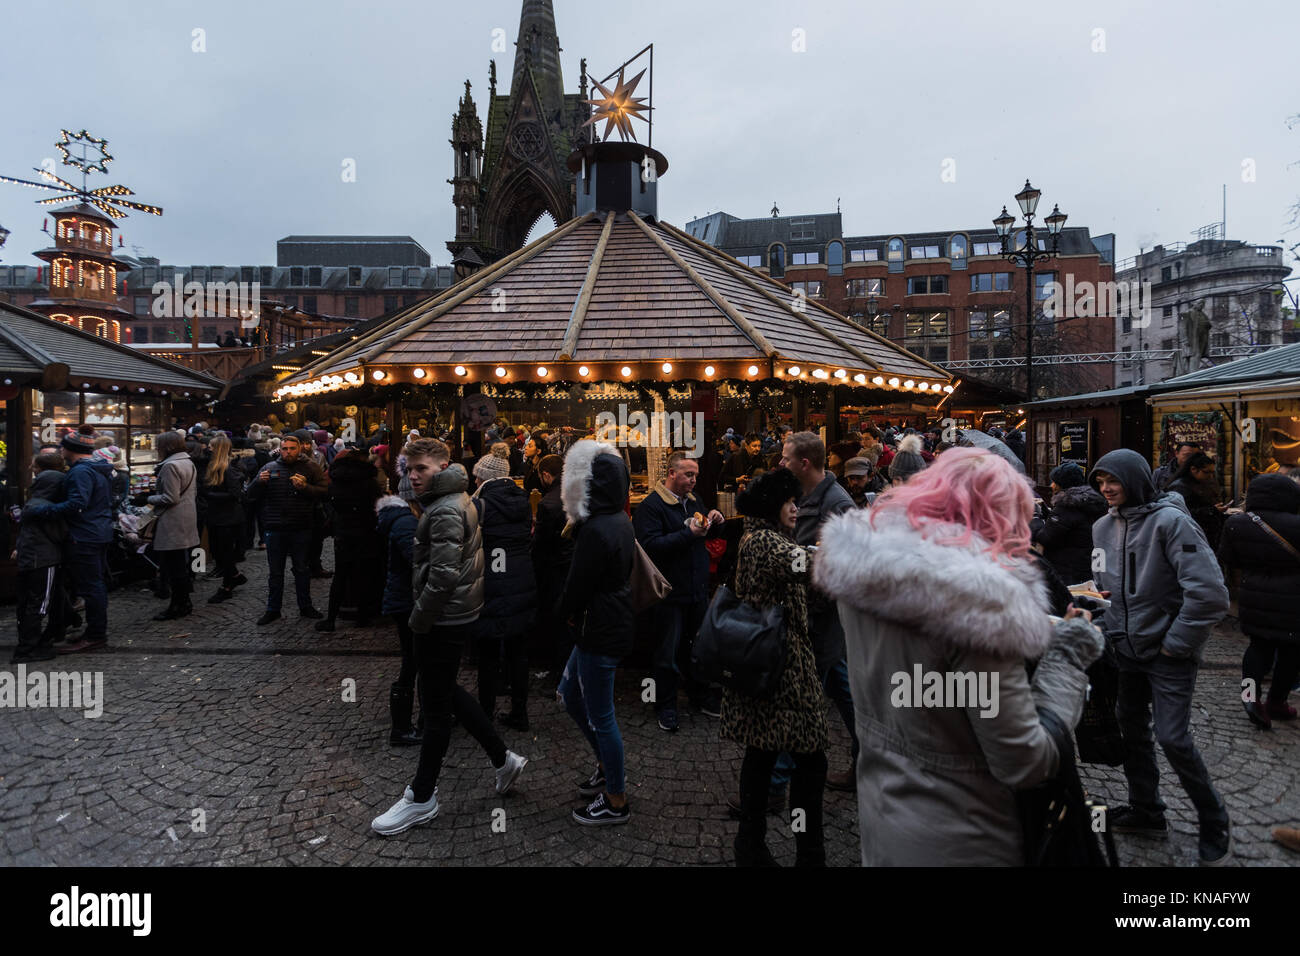 Shoppers And Revellers At Manchester Christmas Markets Around The City, Manchester, England, UK Stock Photo